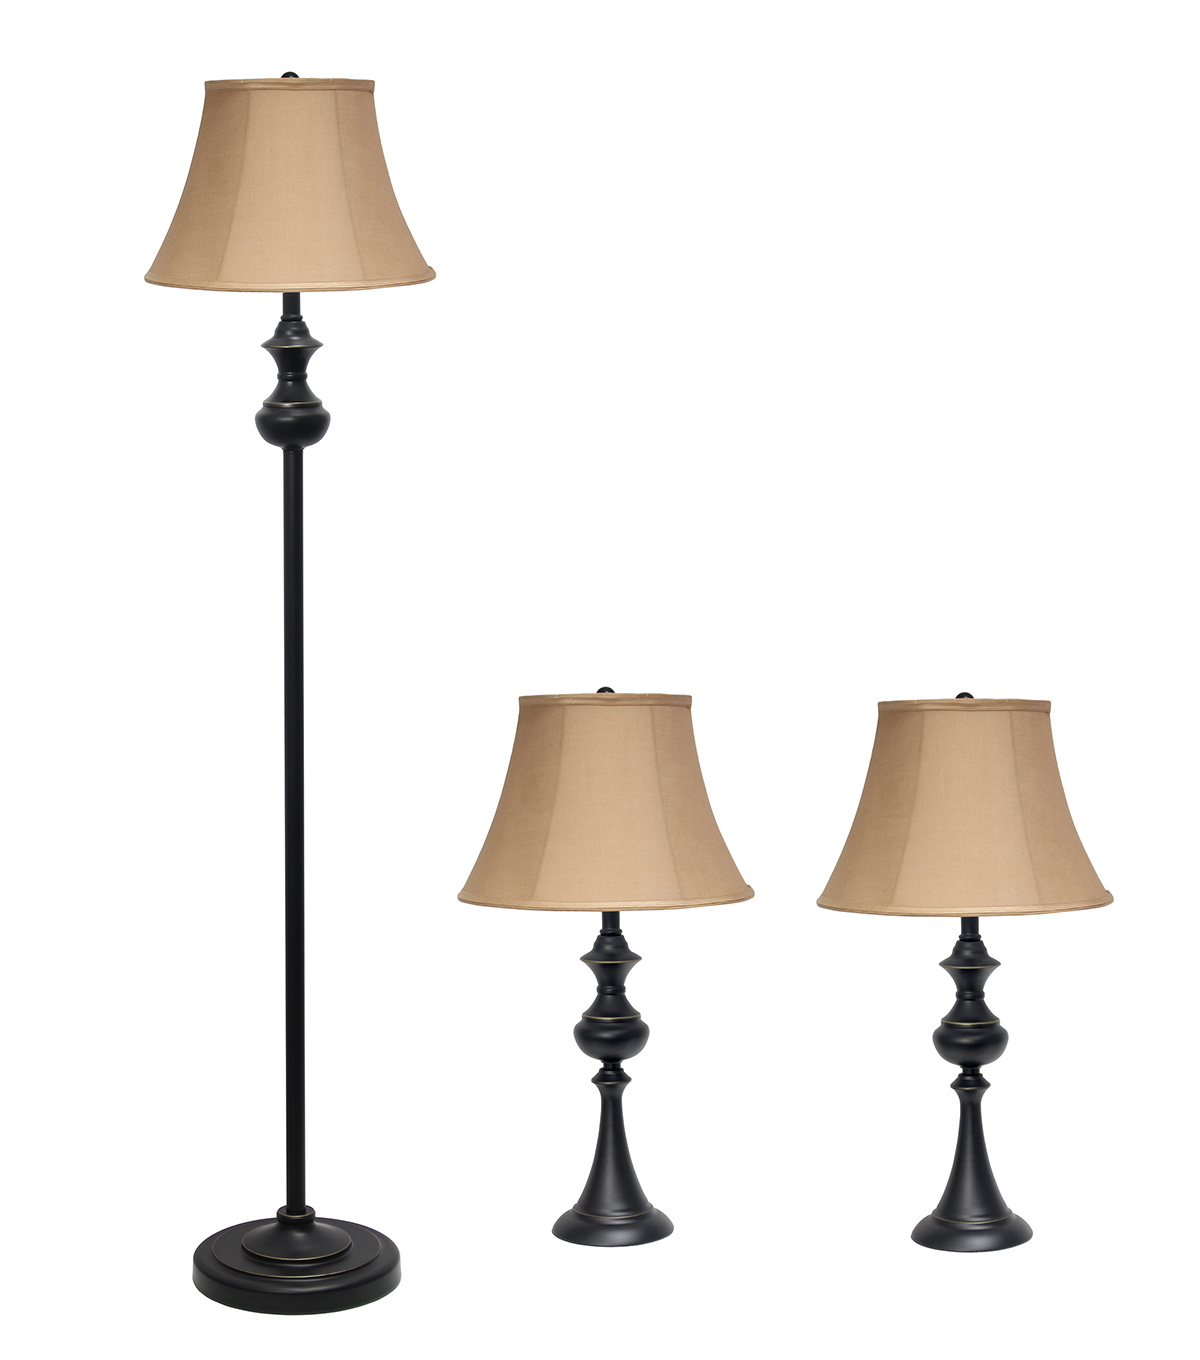 Elegant Designs Traditionally Crafted 3 Pack Lamp Set (2 Table Lamps, 1 Floor Lamp) with Tan Shades, Restoration Bronze